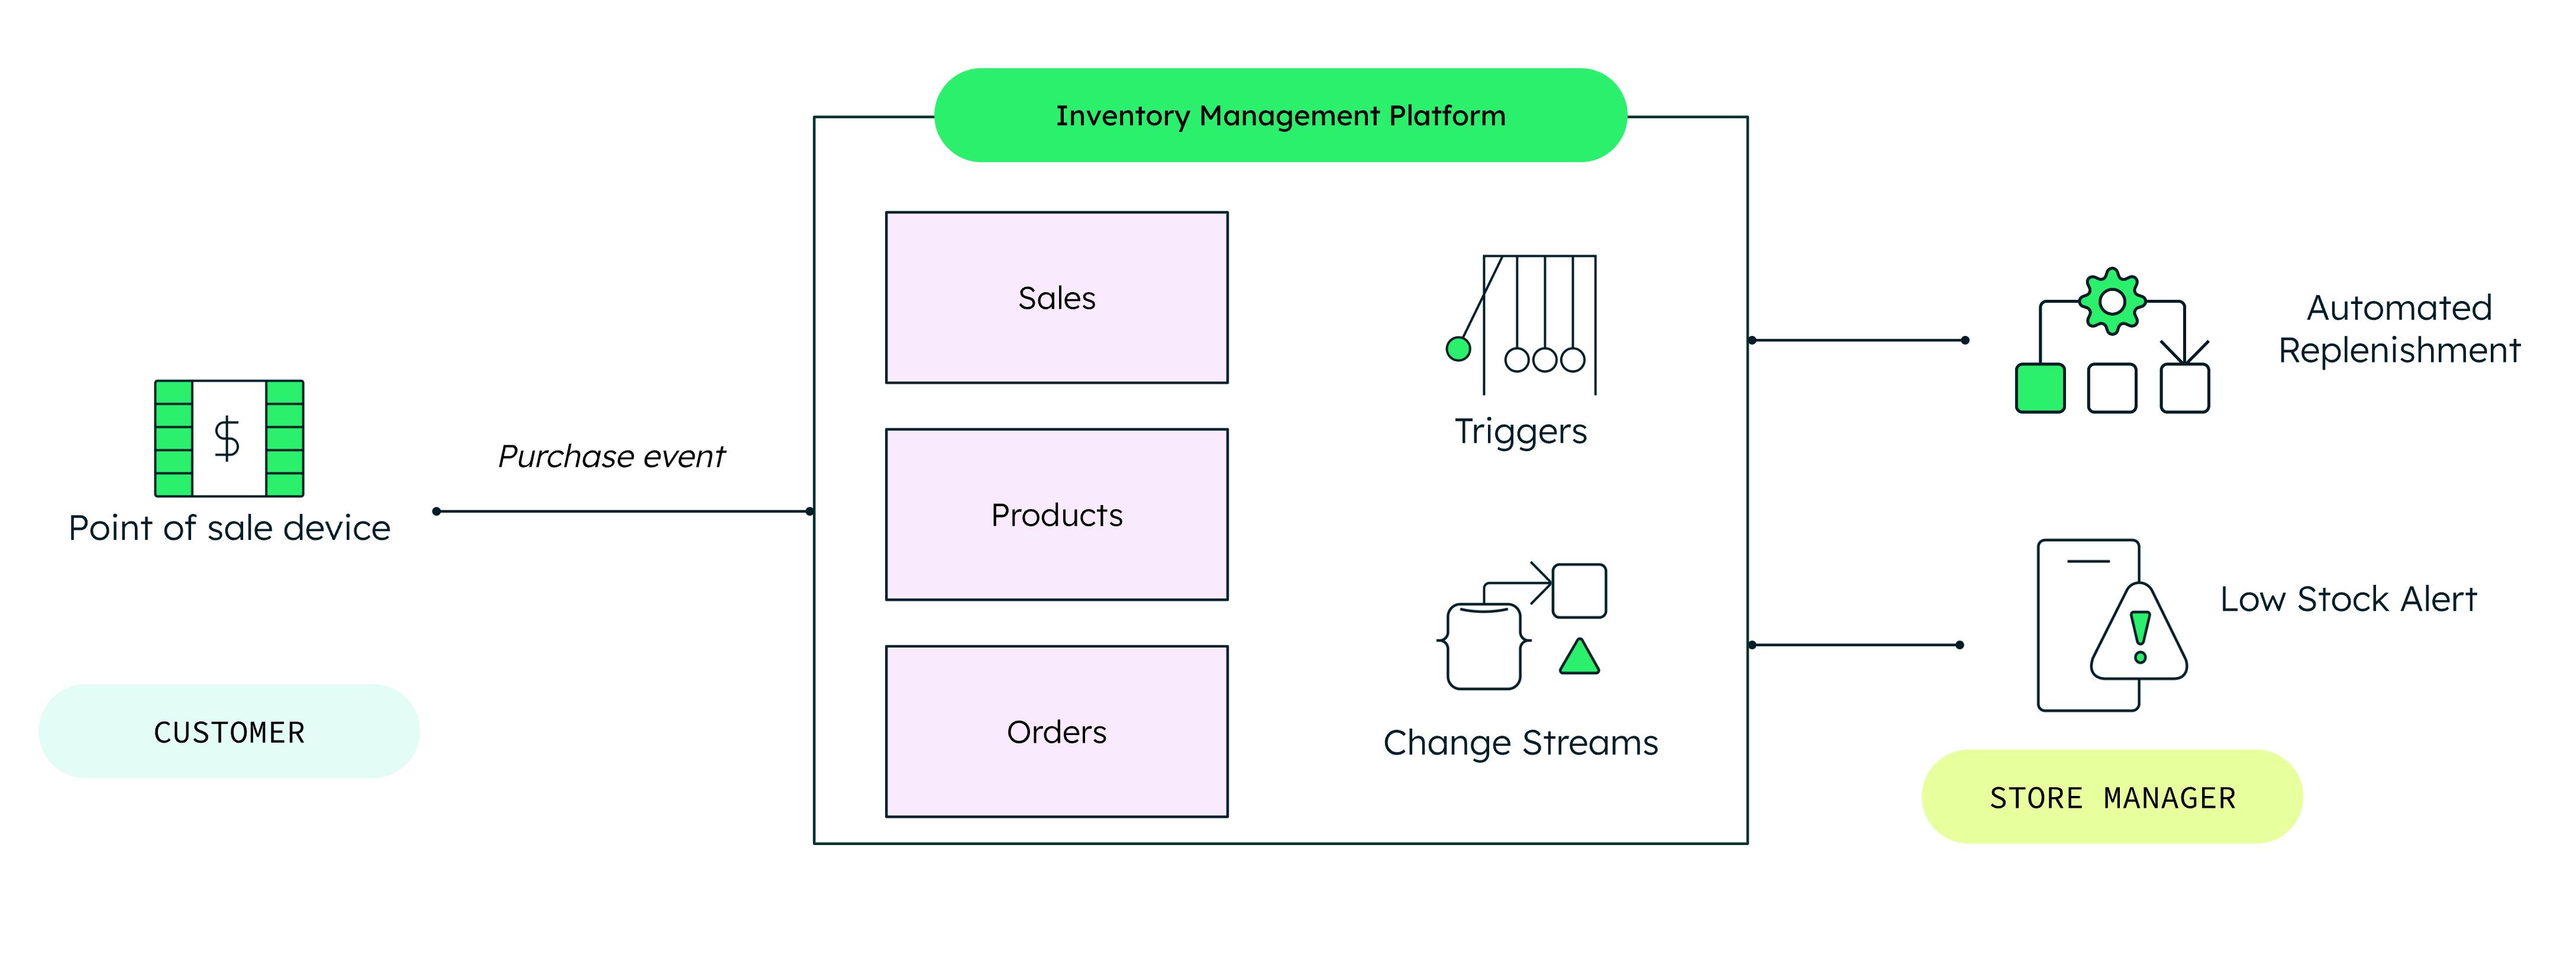 Diagram of event-driven architecture for inventory mangement. The point of sale device, used by the customer, activates the purchase event with the Inventory management platform. The platform utilizes triggers and change streams to connect with the back-end systems like automated replenishment and low stock alert.